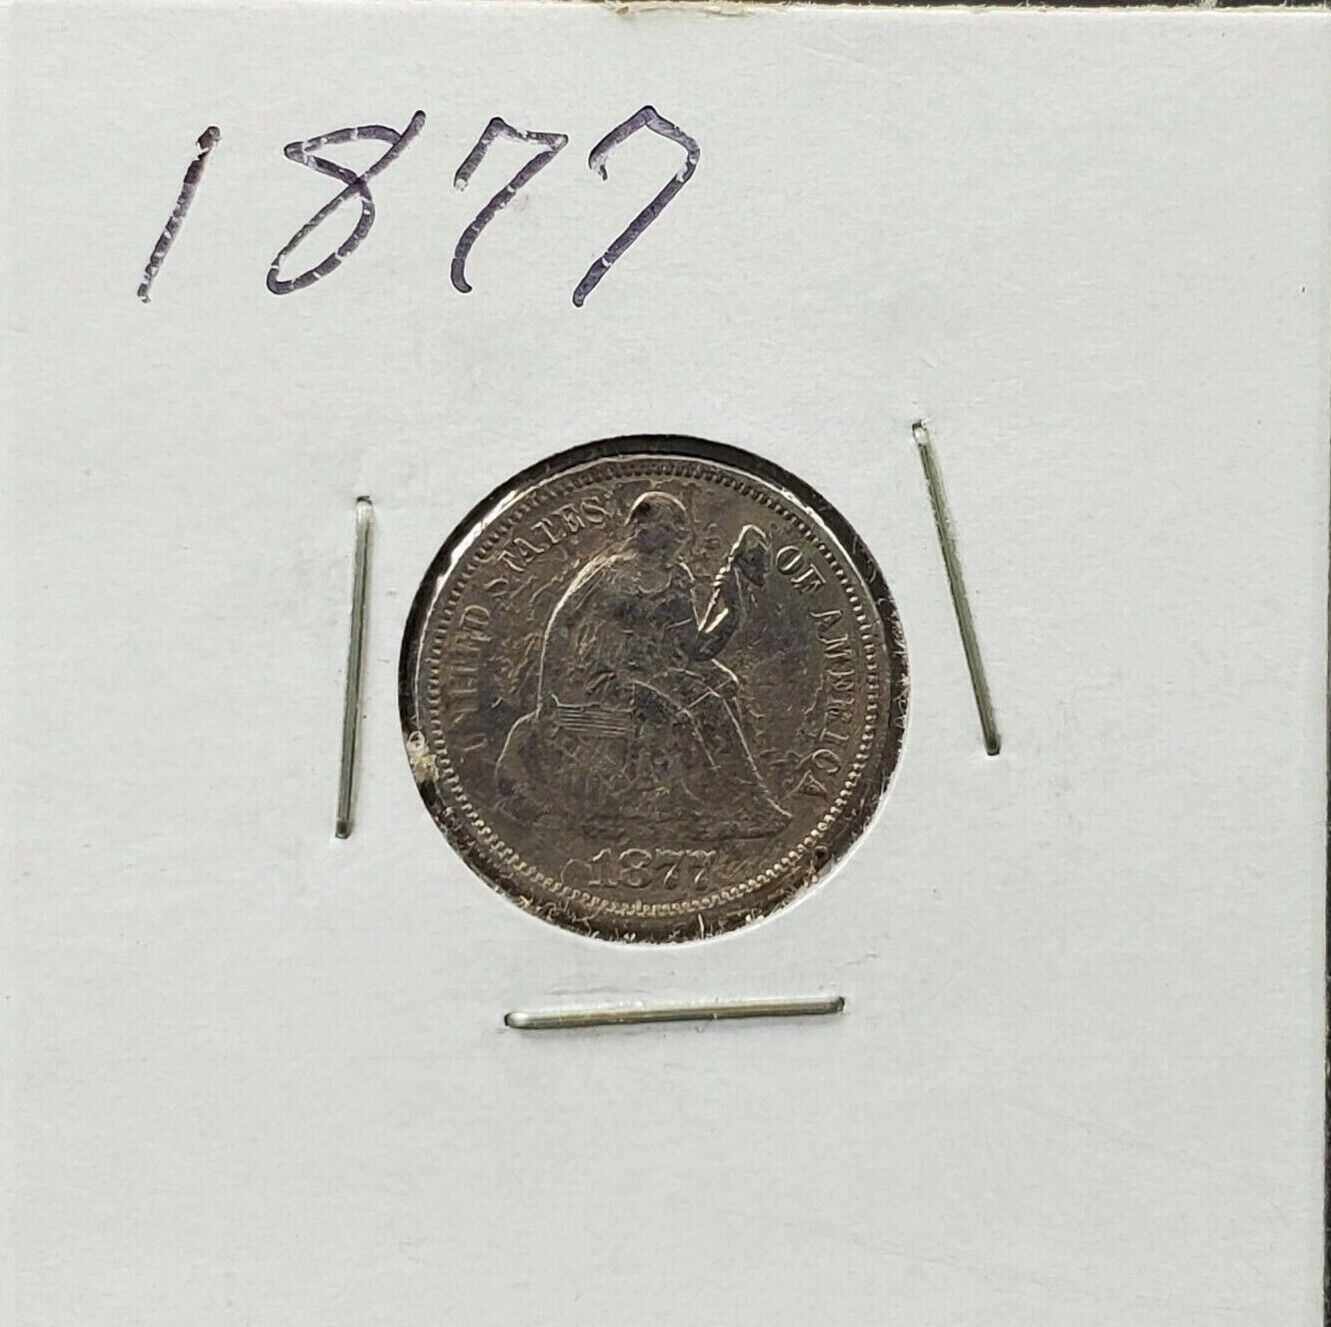 1877 P SEATED LIBERTY SILVER DIME COIN VF Very Fine Details Rev Scratch